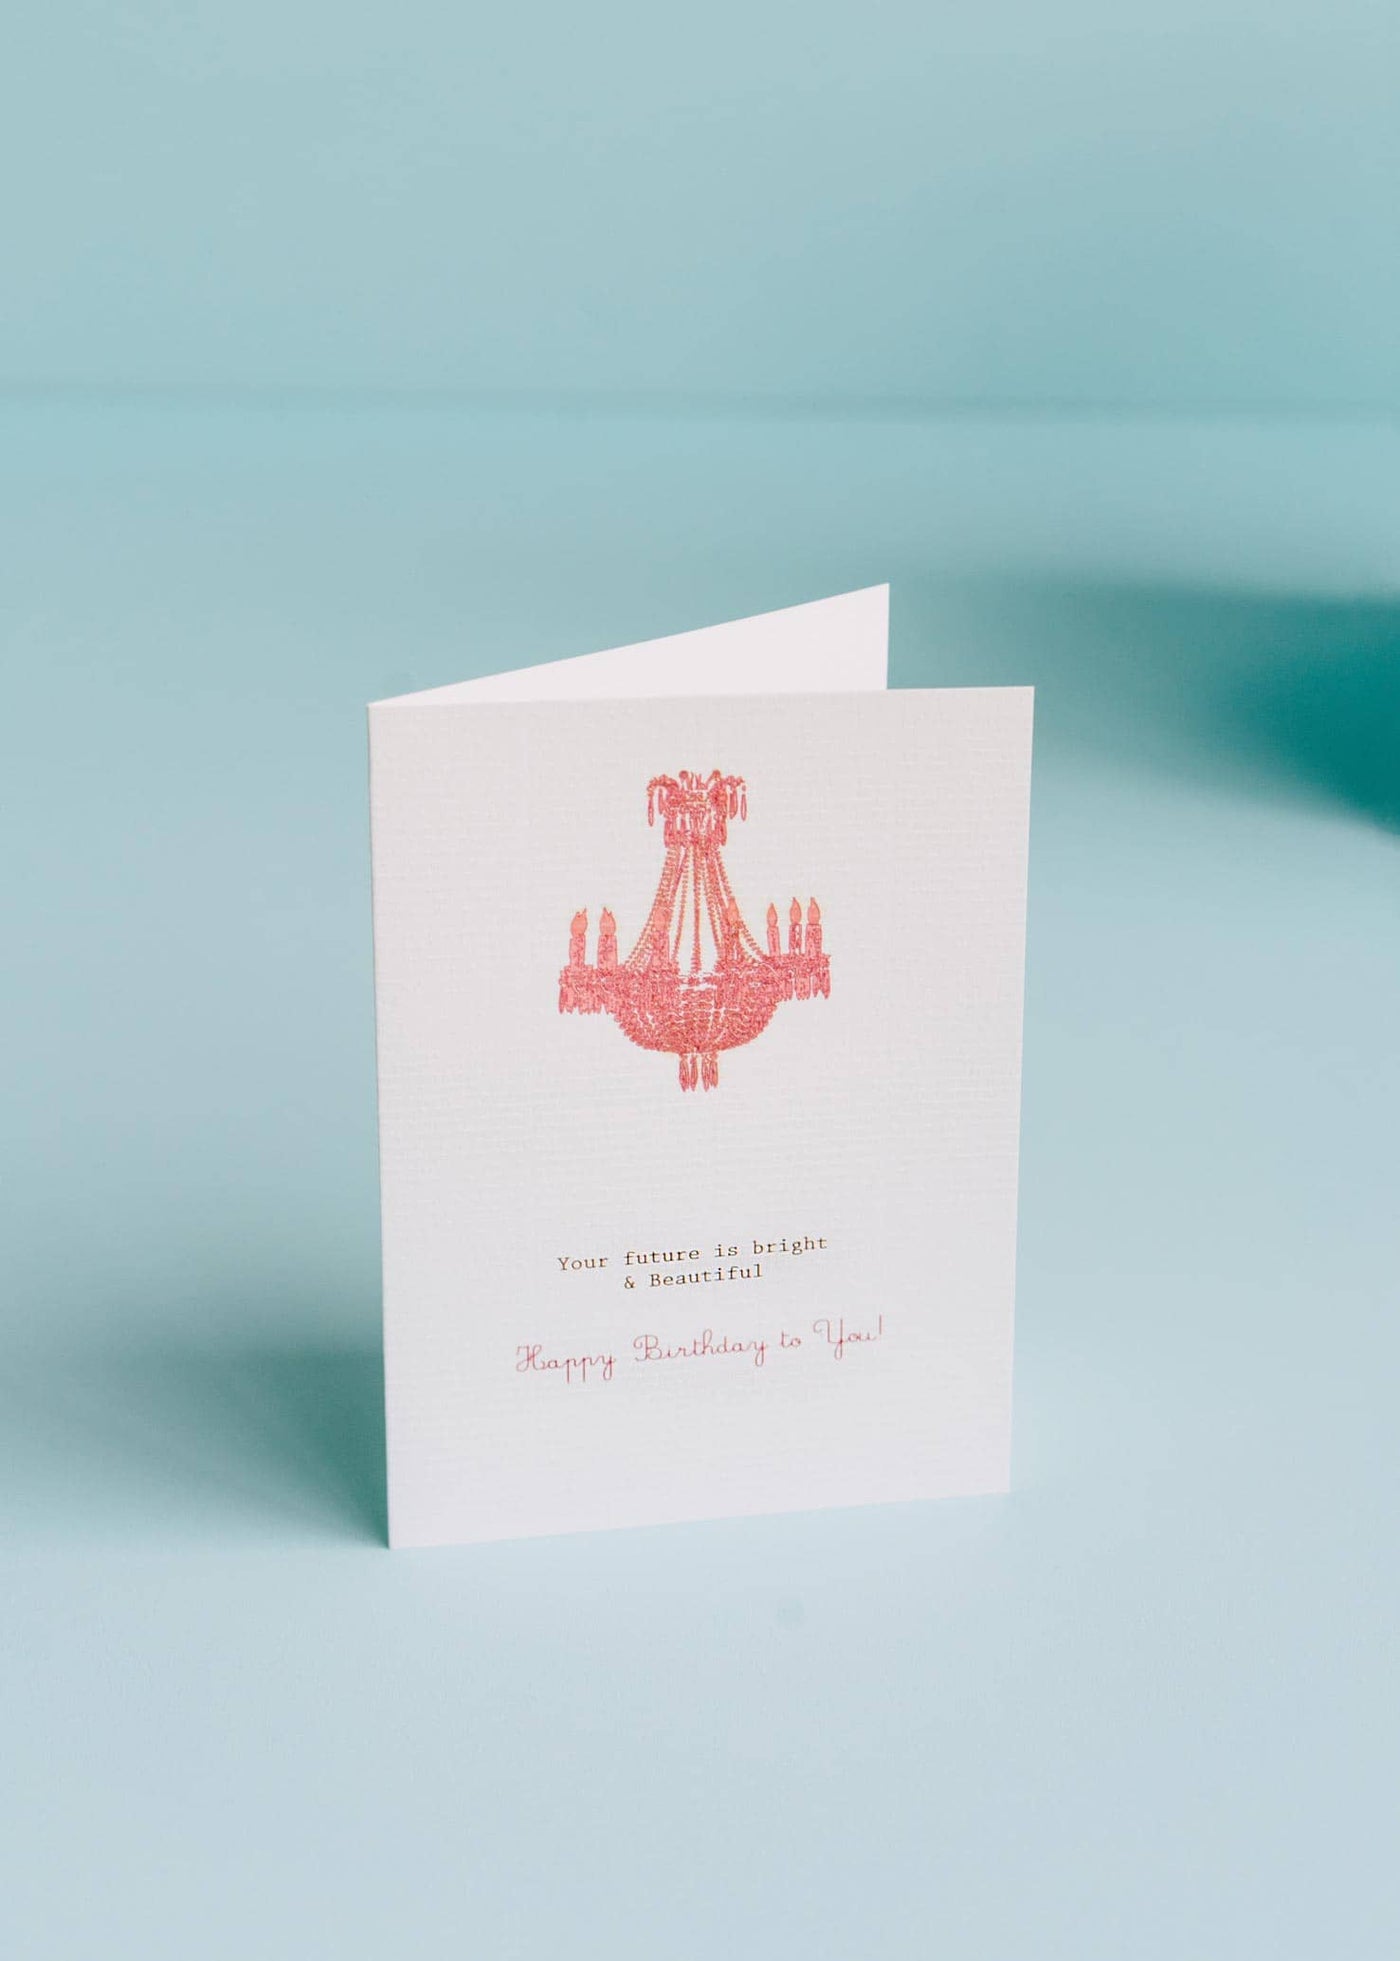 BIRTHDAY GREETING CARD "YOUR FUTURE IS BRIGHT"